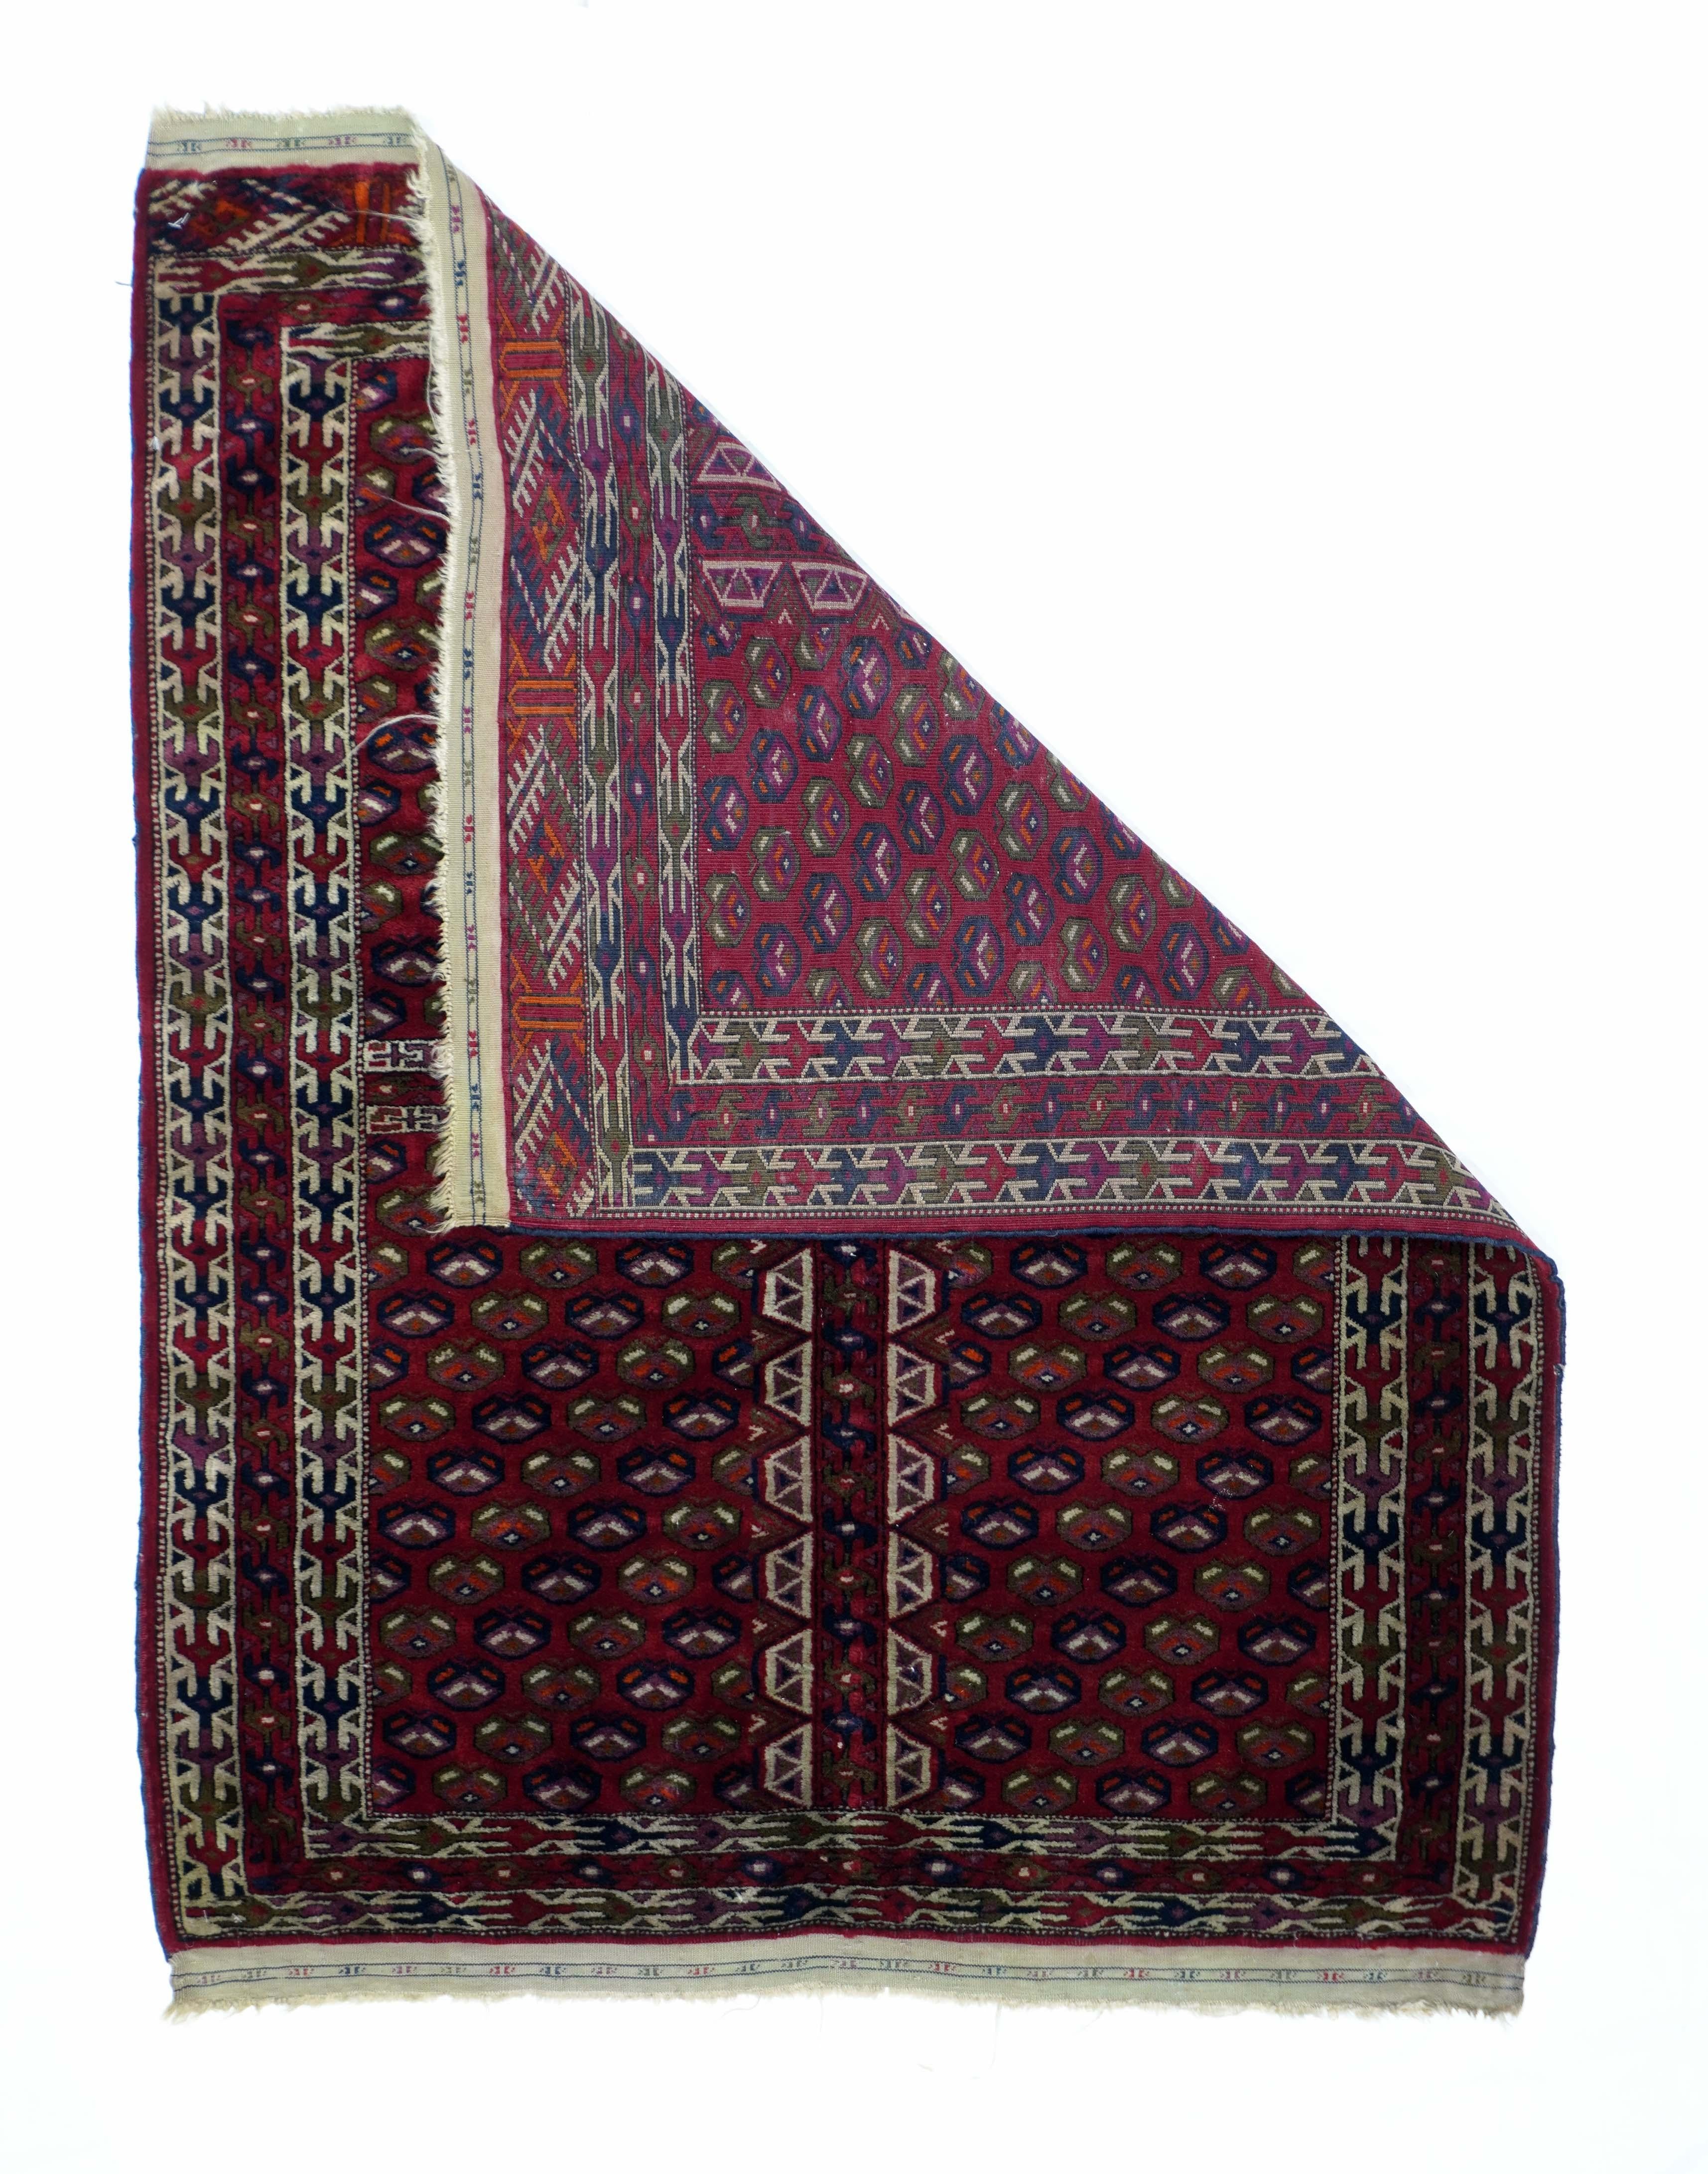 Antique Russian Yamud Bokara rug, measures :  3'5'' x 4'2''. Liver tone quartered field with uniform color diagonals of unidirectional small flowers. Double main ivory borders with herringbone designs. Central border matches the two central vertical